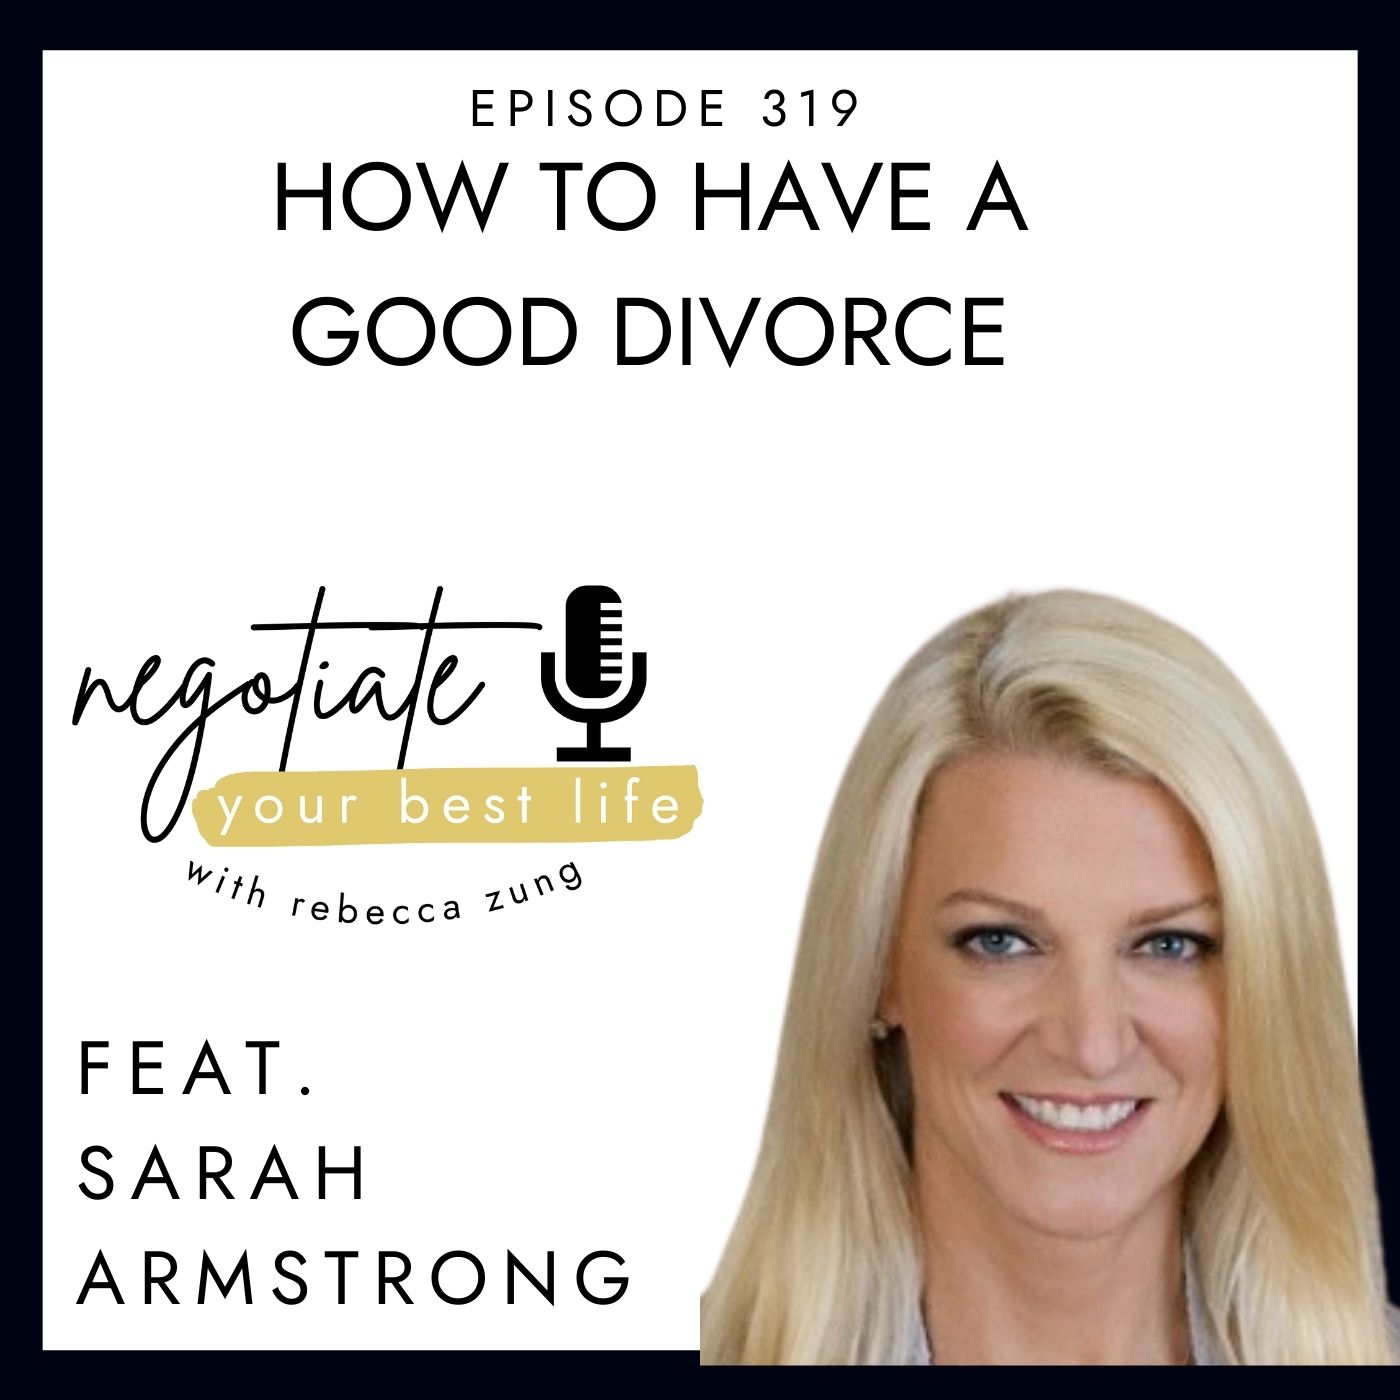 How to Have a Good Divorce with Sarah Armstrong on Negotiate Your Best Life with Rebecca Zung #319